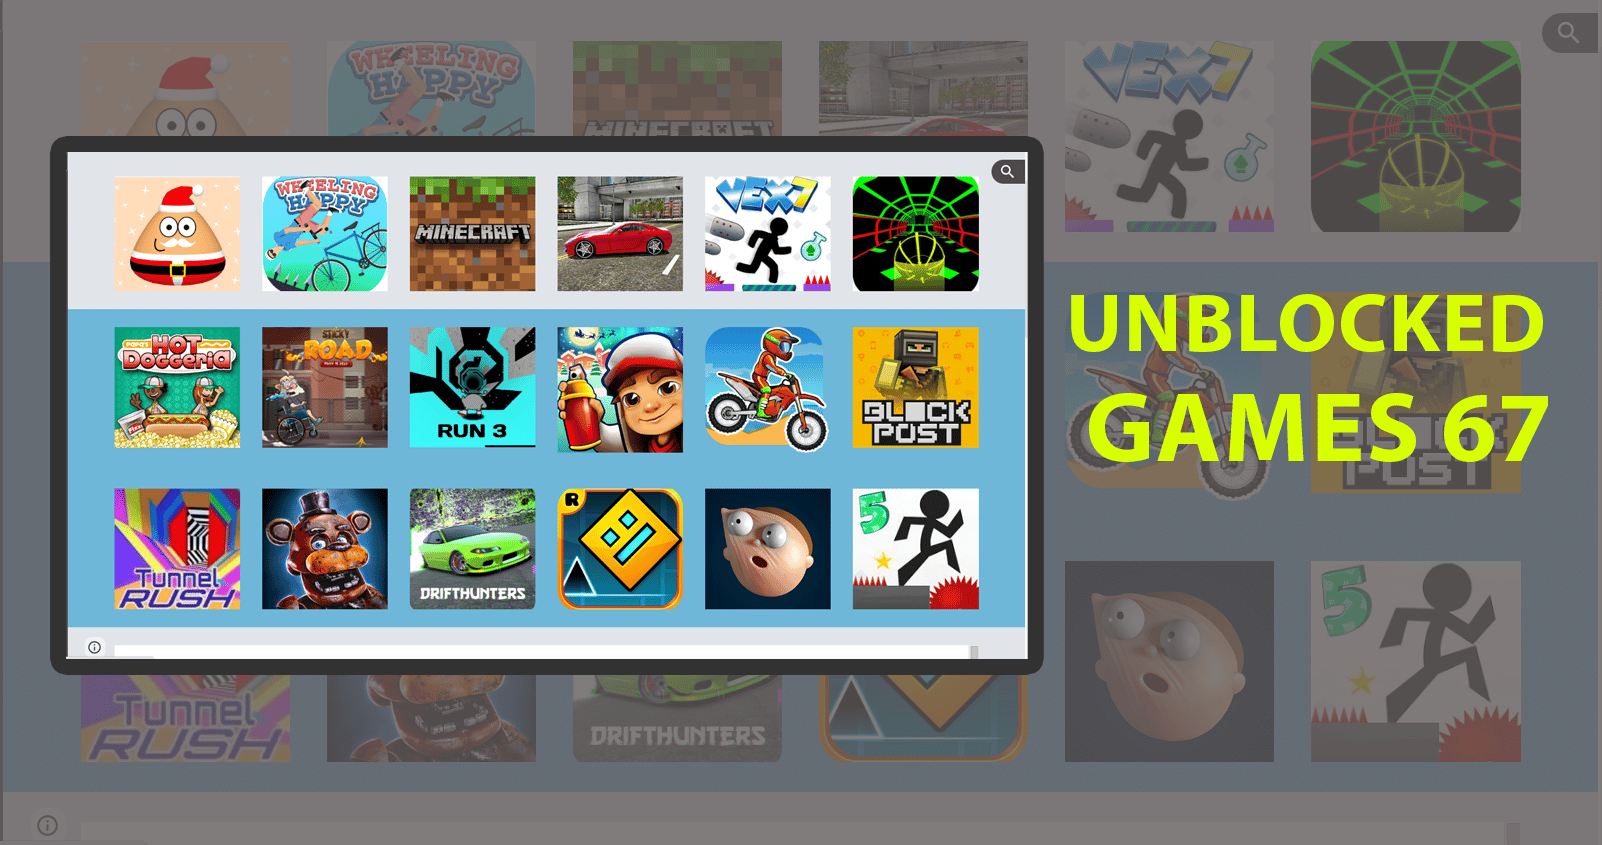 67 Unblocked Games: Safe Way to Play Games - MOBSEAR Gallery